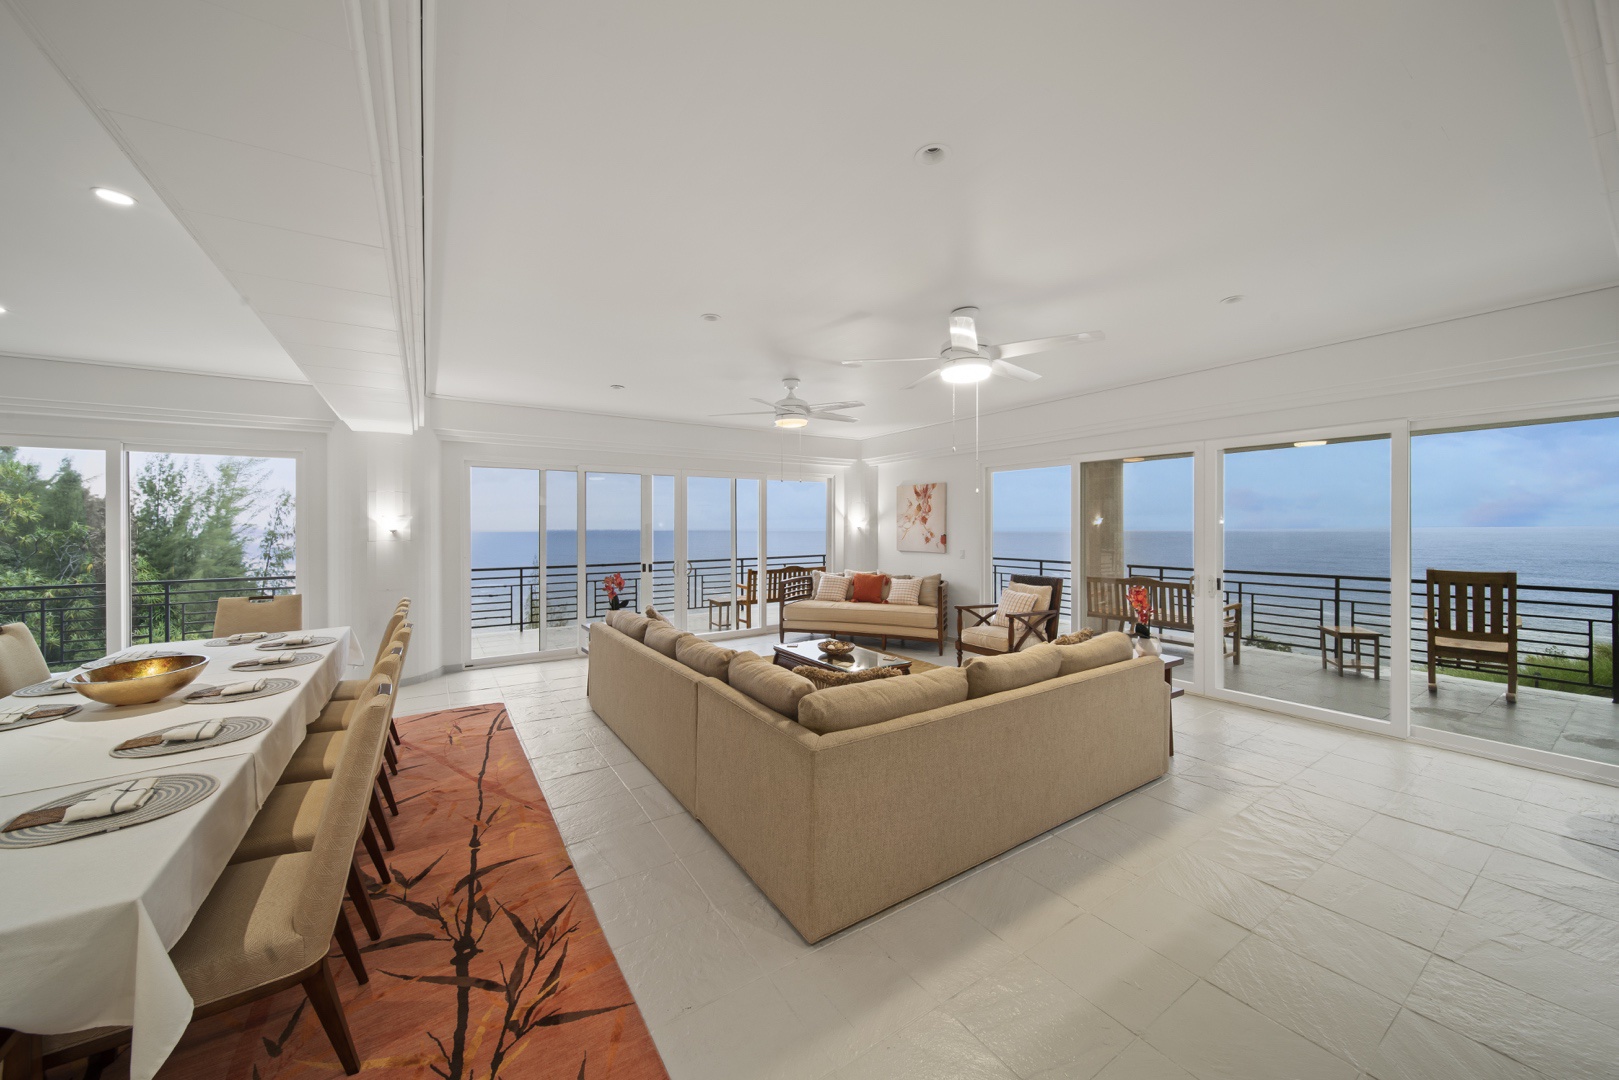 Ninole Vacation Rentals, Waterfalling Estate - Wider view of great room and deck seating.